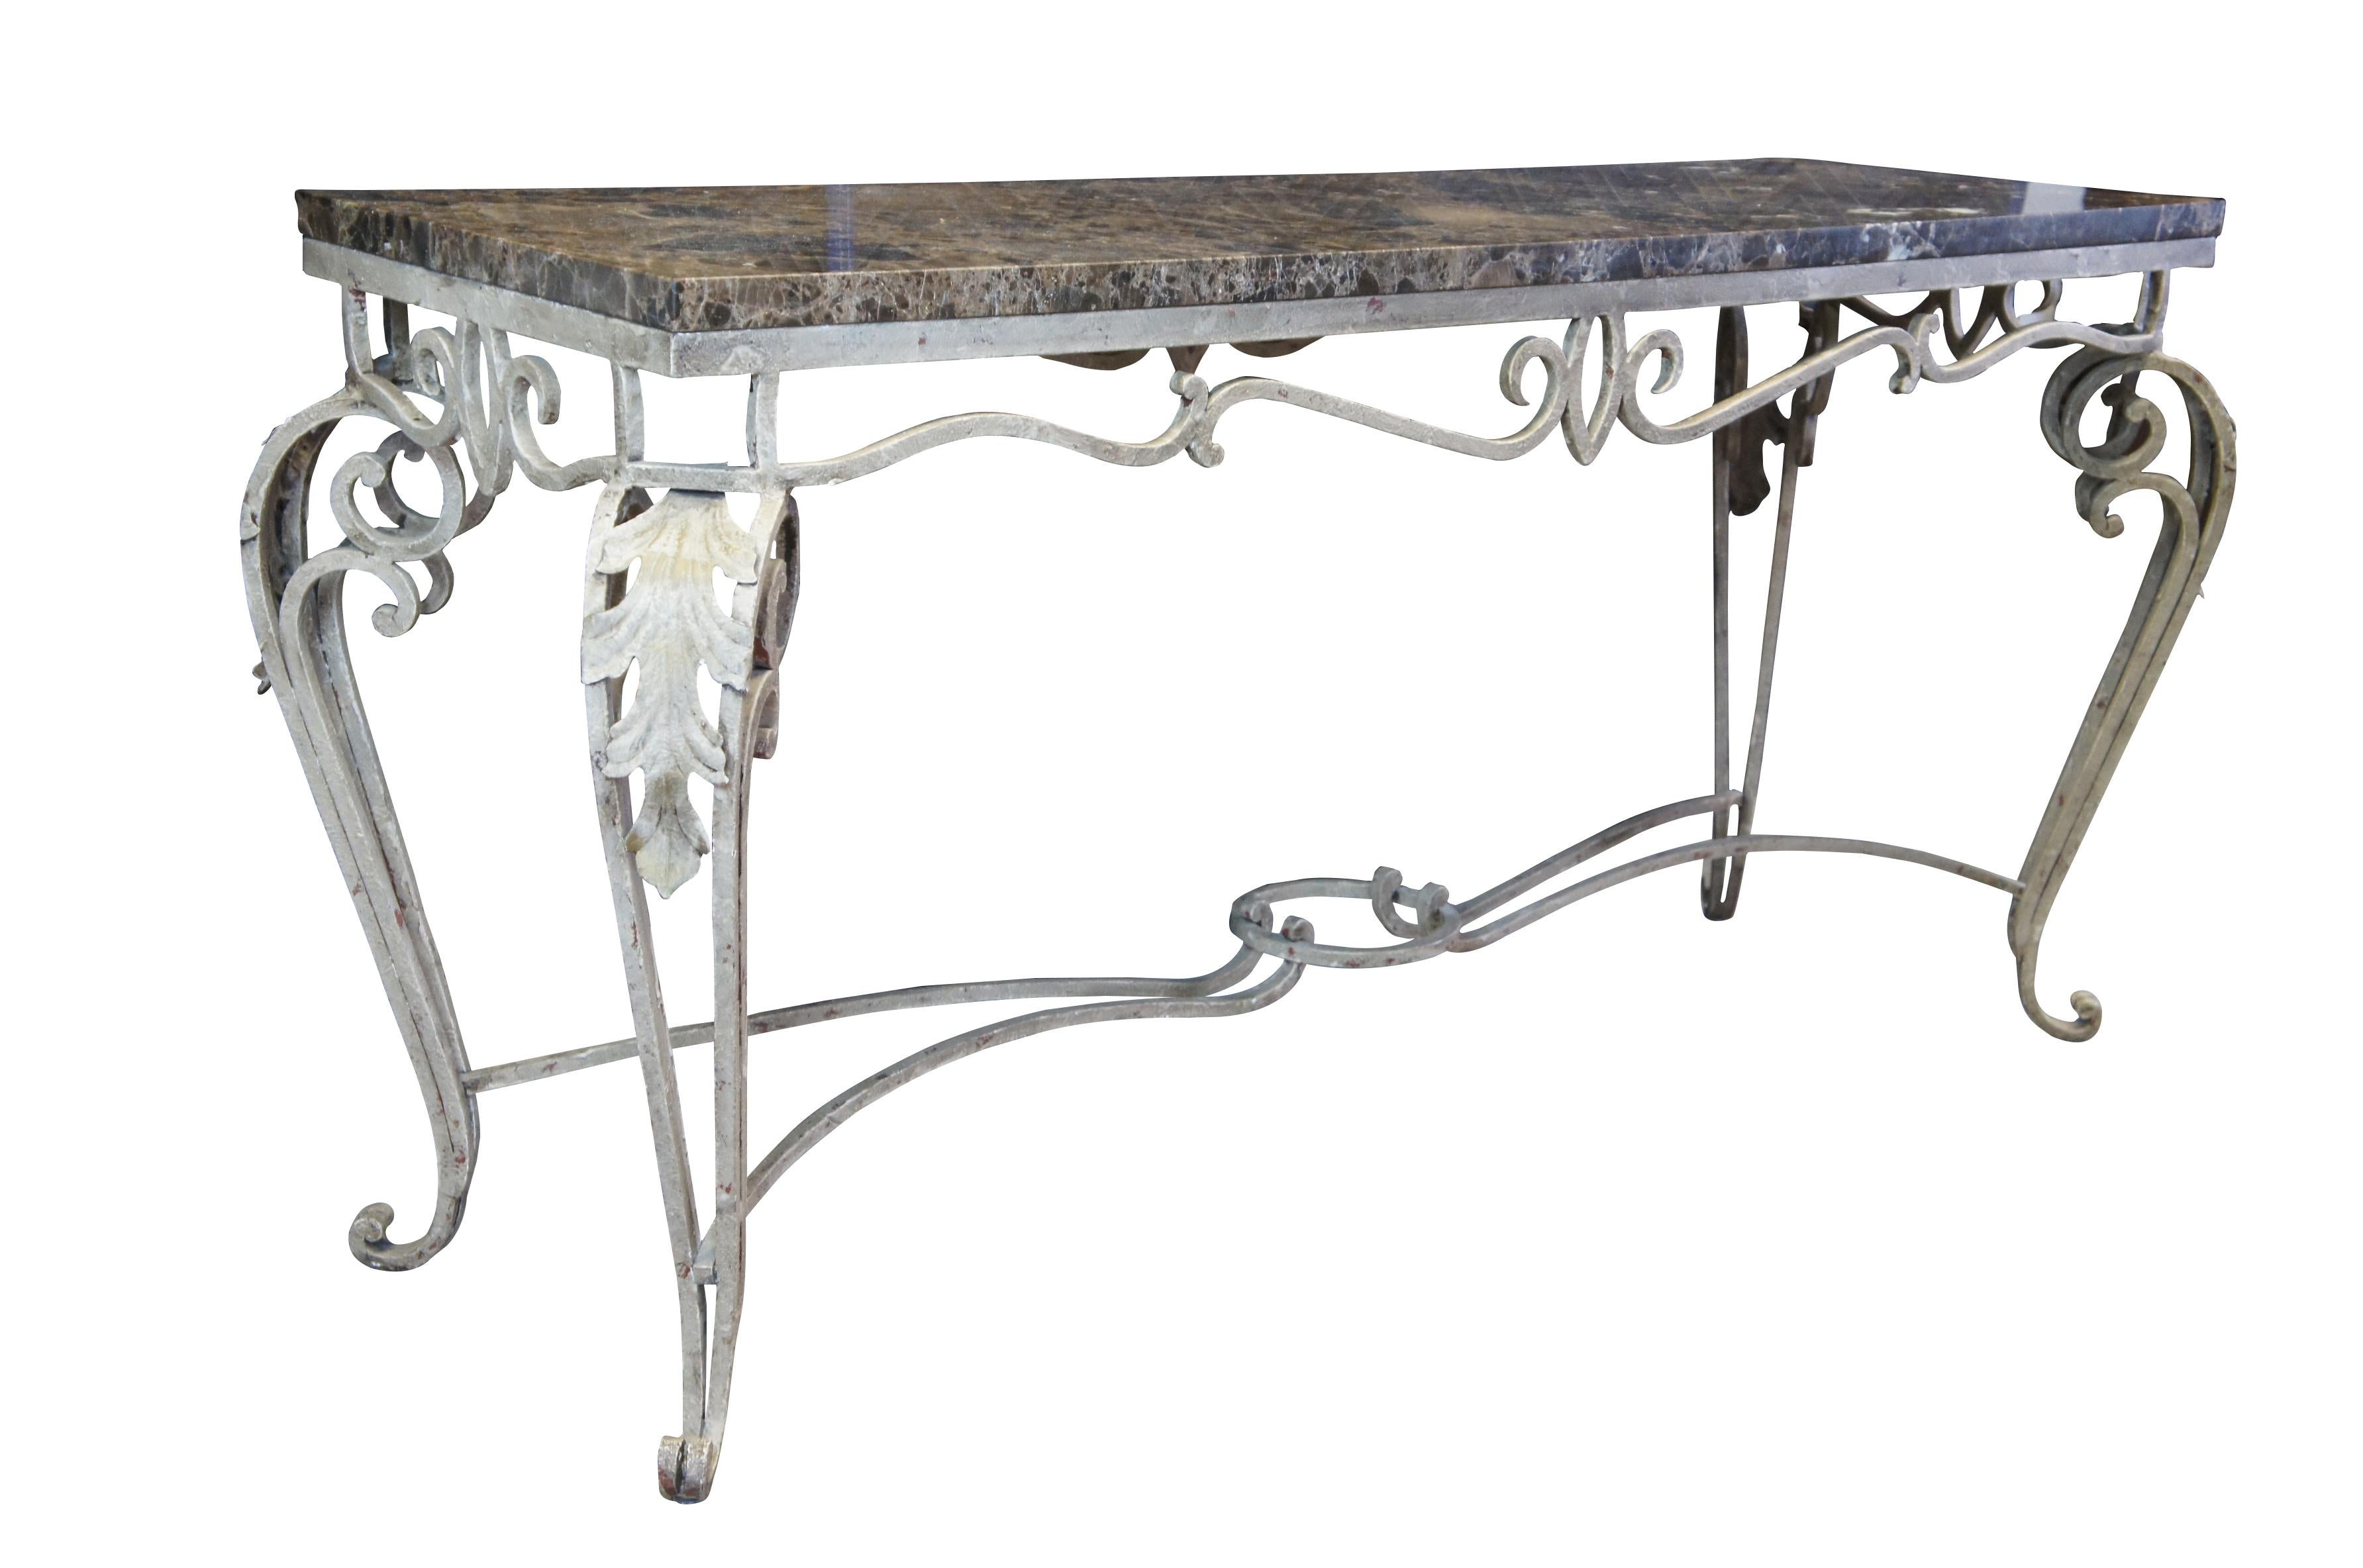 A lovely scrolled iron console table with Spanish marble top.  Features a rectangular form with serpentine skirt and cabriole legs with acanthus design along the knee.  

Dimensions:
23